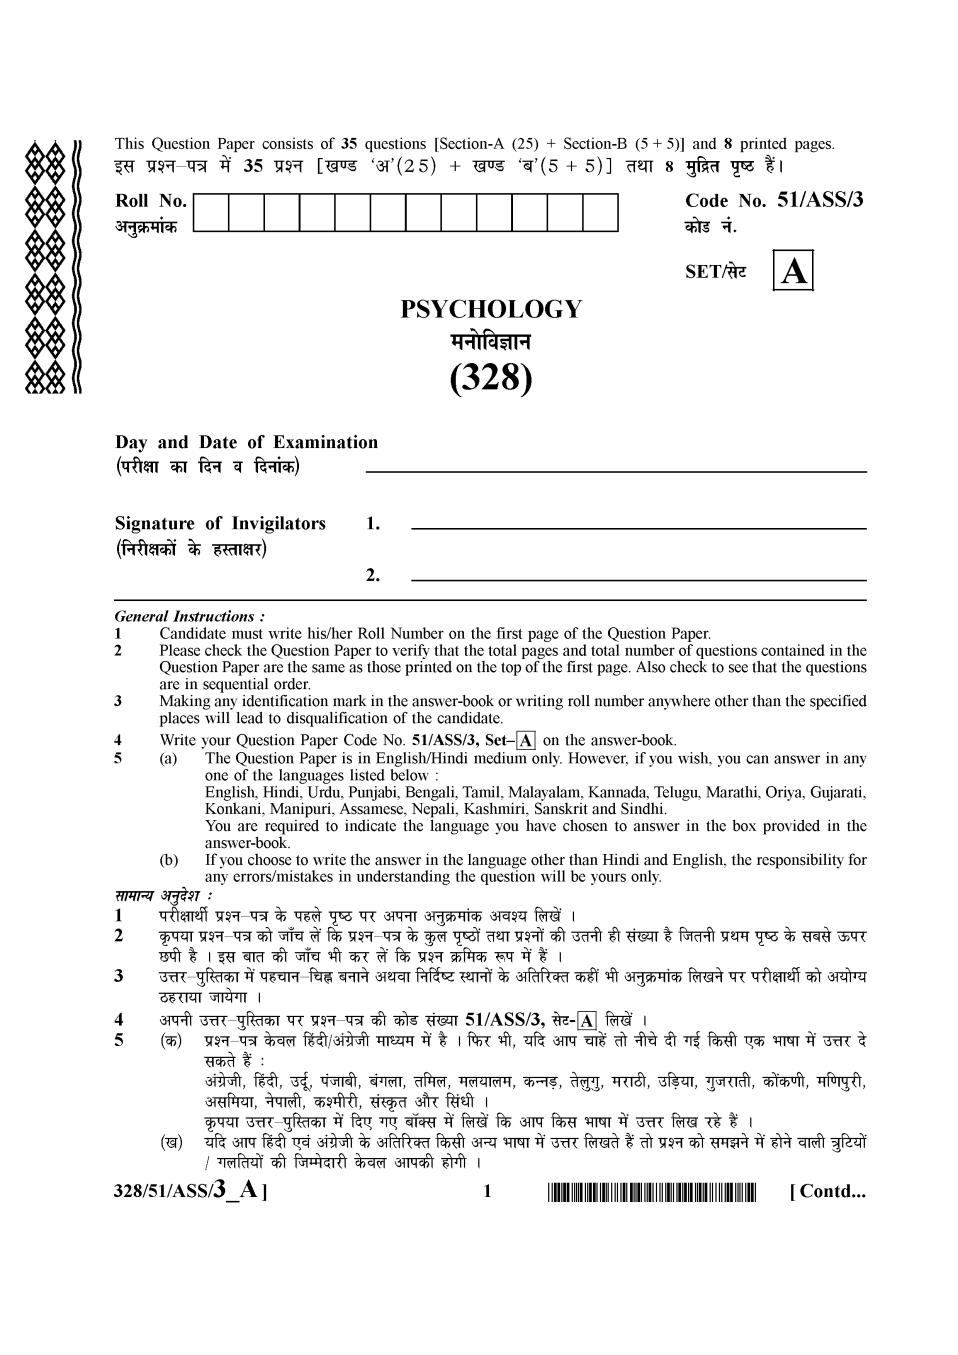 NIOS Class 12 Question Paper Oct 2015 - Psychology - Page 1